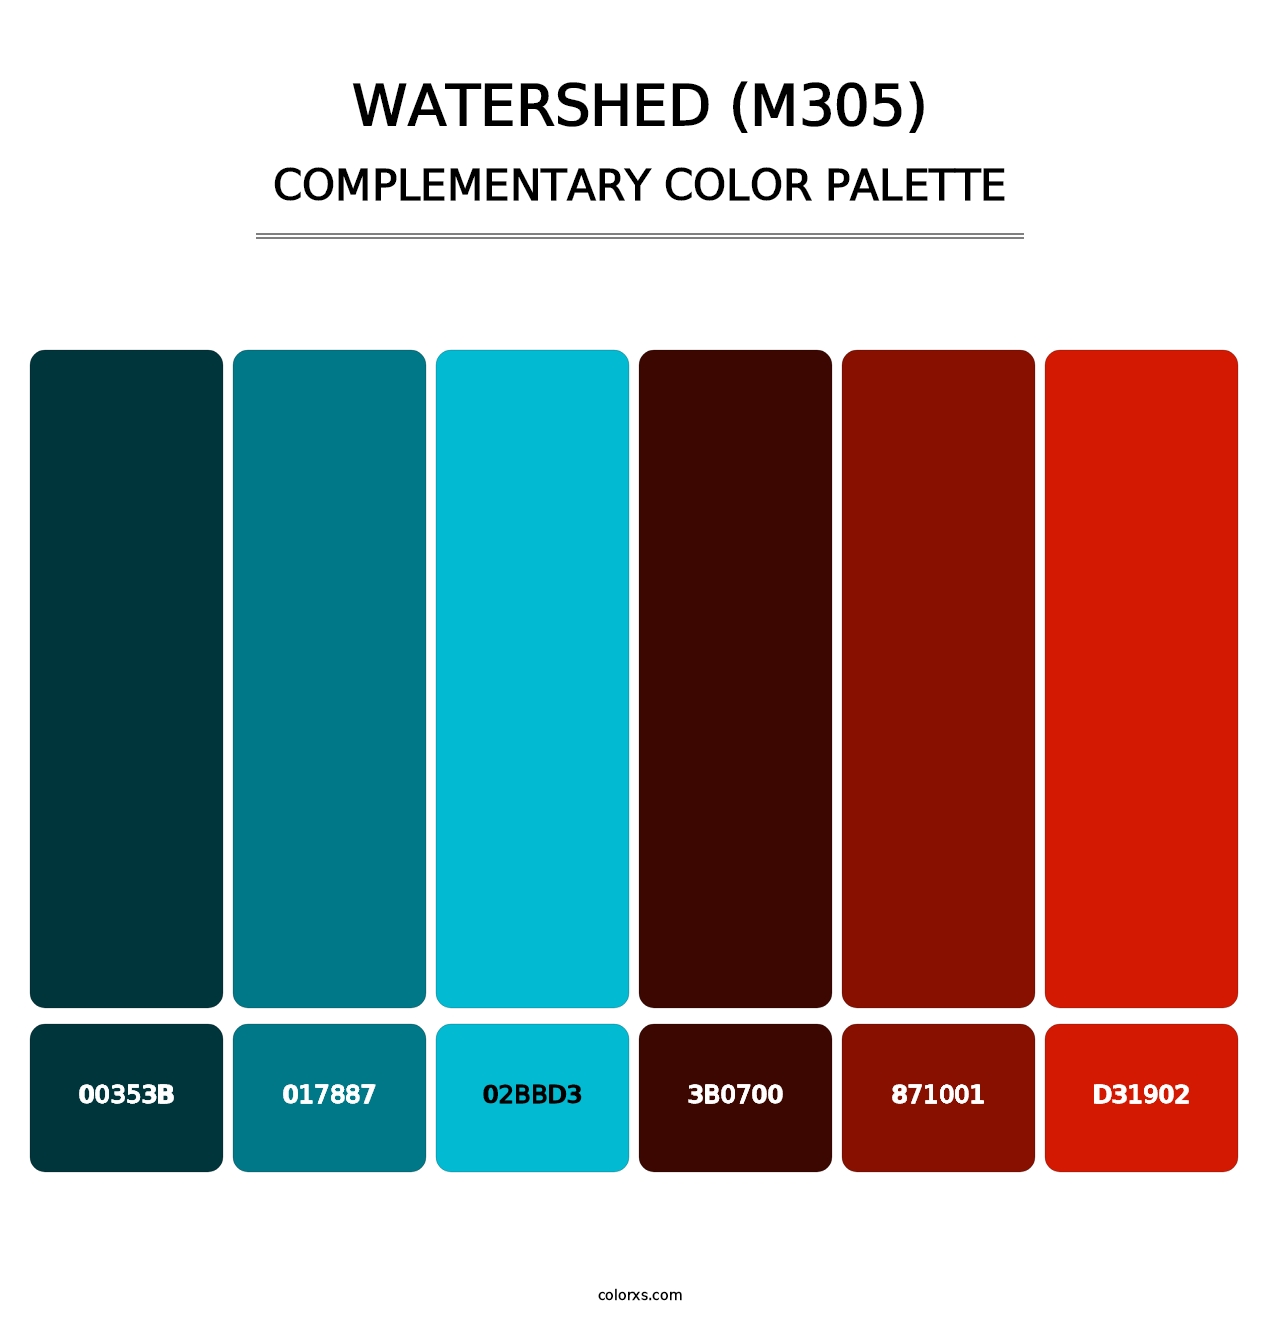 Watershed (M305) - Complementary Color Palette